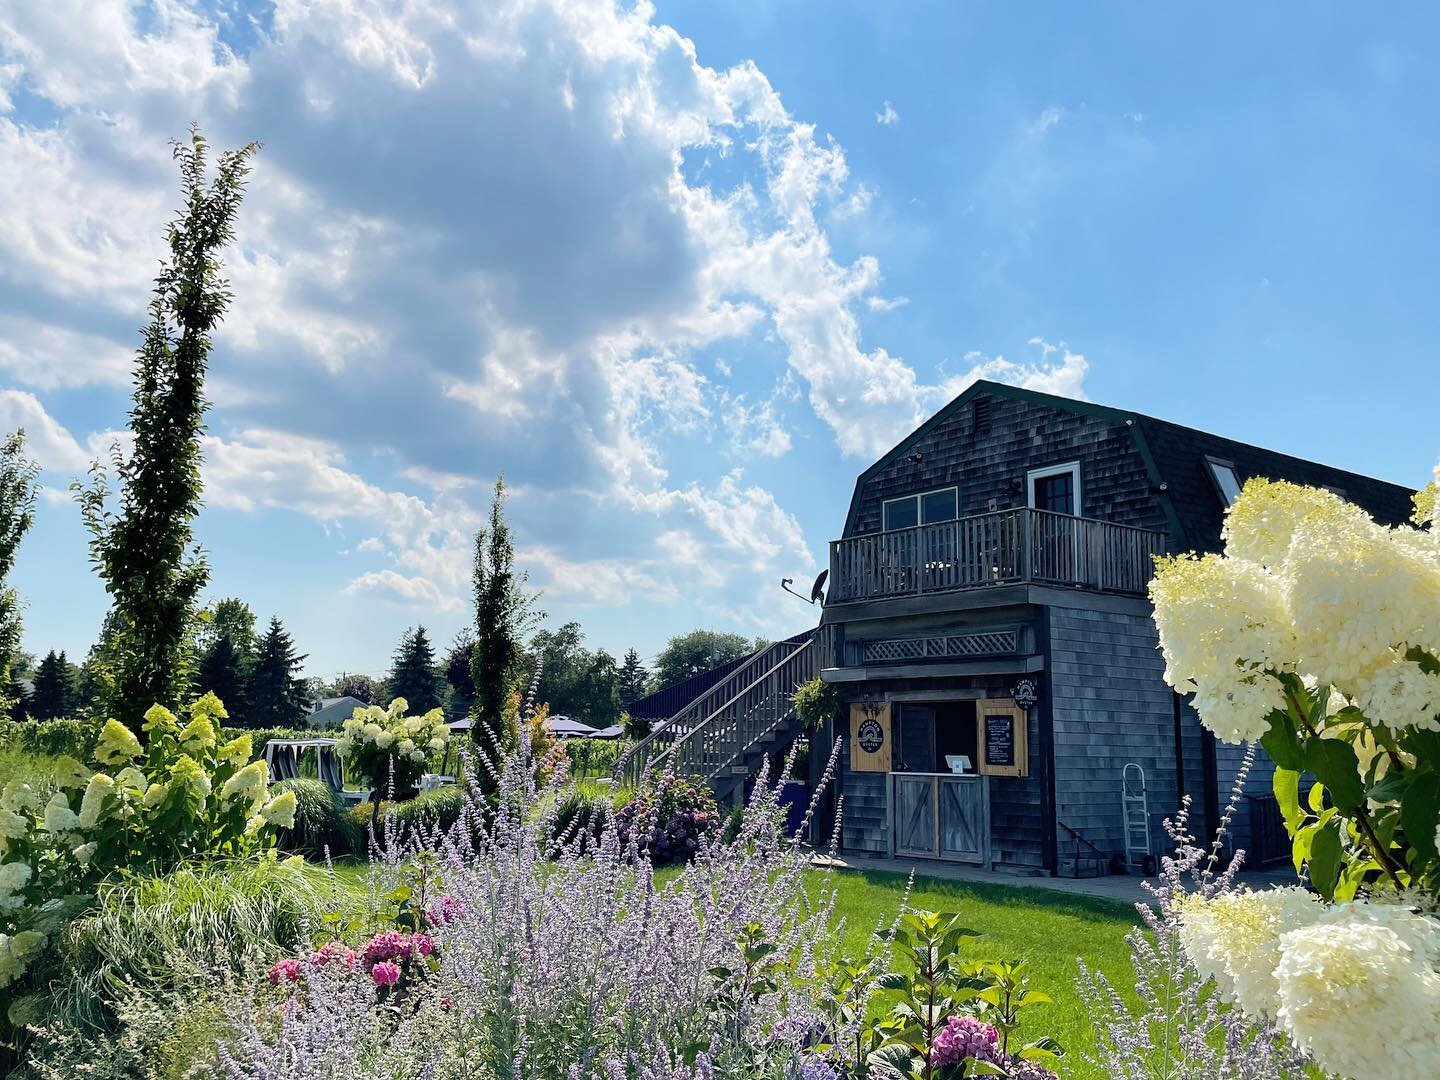 As Labor Day unofficially marks the changing of seasons, we would like to thank everyone who has visited us at @peconicbayvineyards during our first summer! We had a blast and hope we provided you with a tasty break from the heat.

And if you haven&r